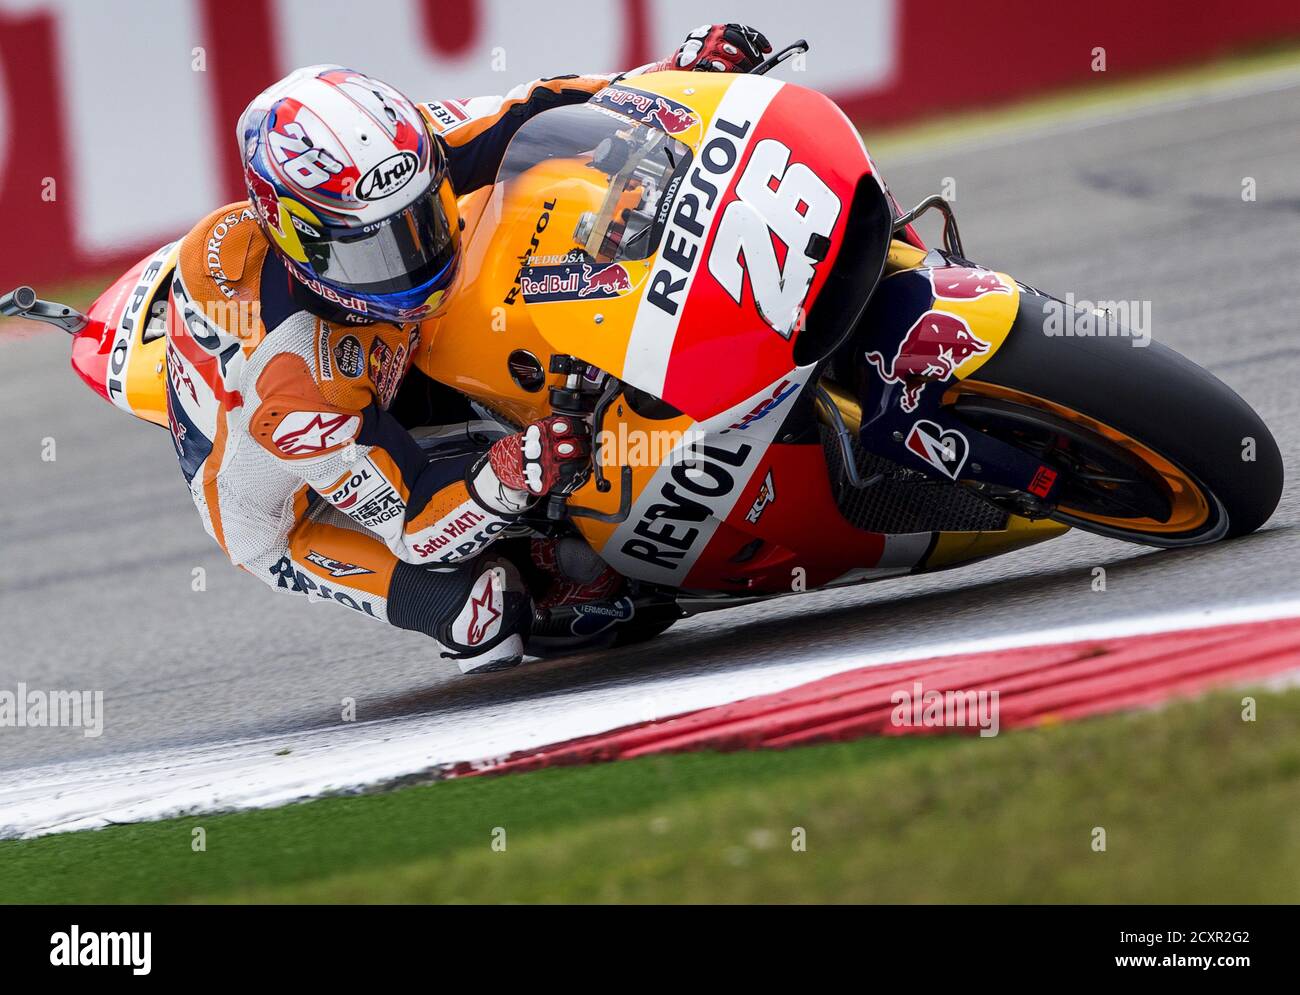 particle Adaptability Medal Honda rider dani pedrosa 26 hi-res stock photography and images - Page 2 -  Alamy